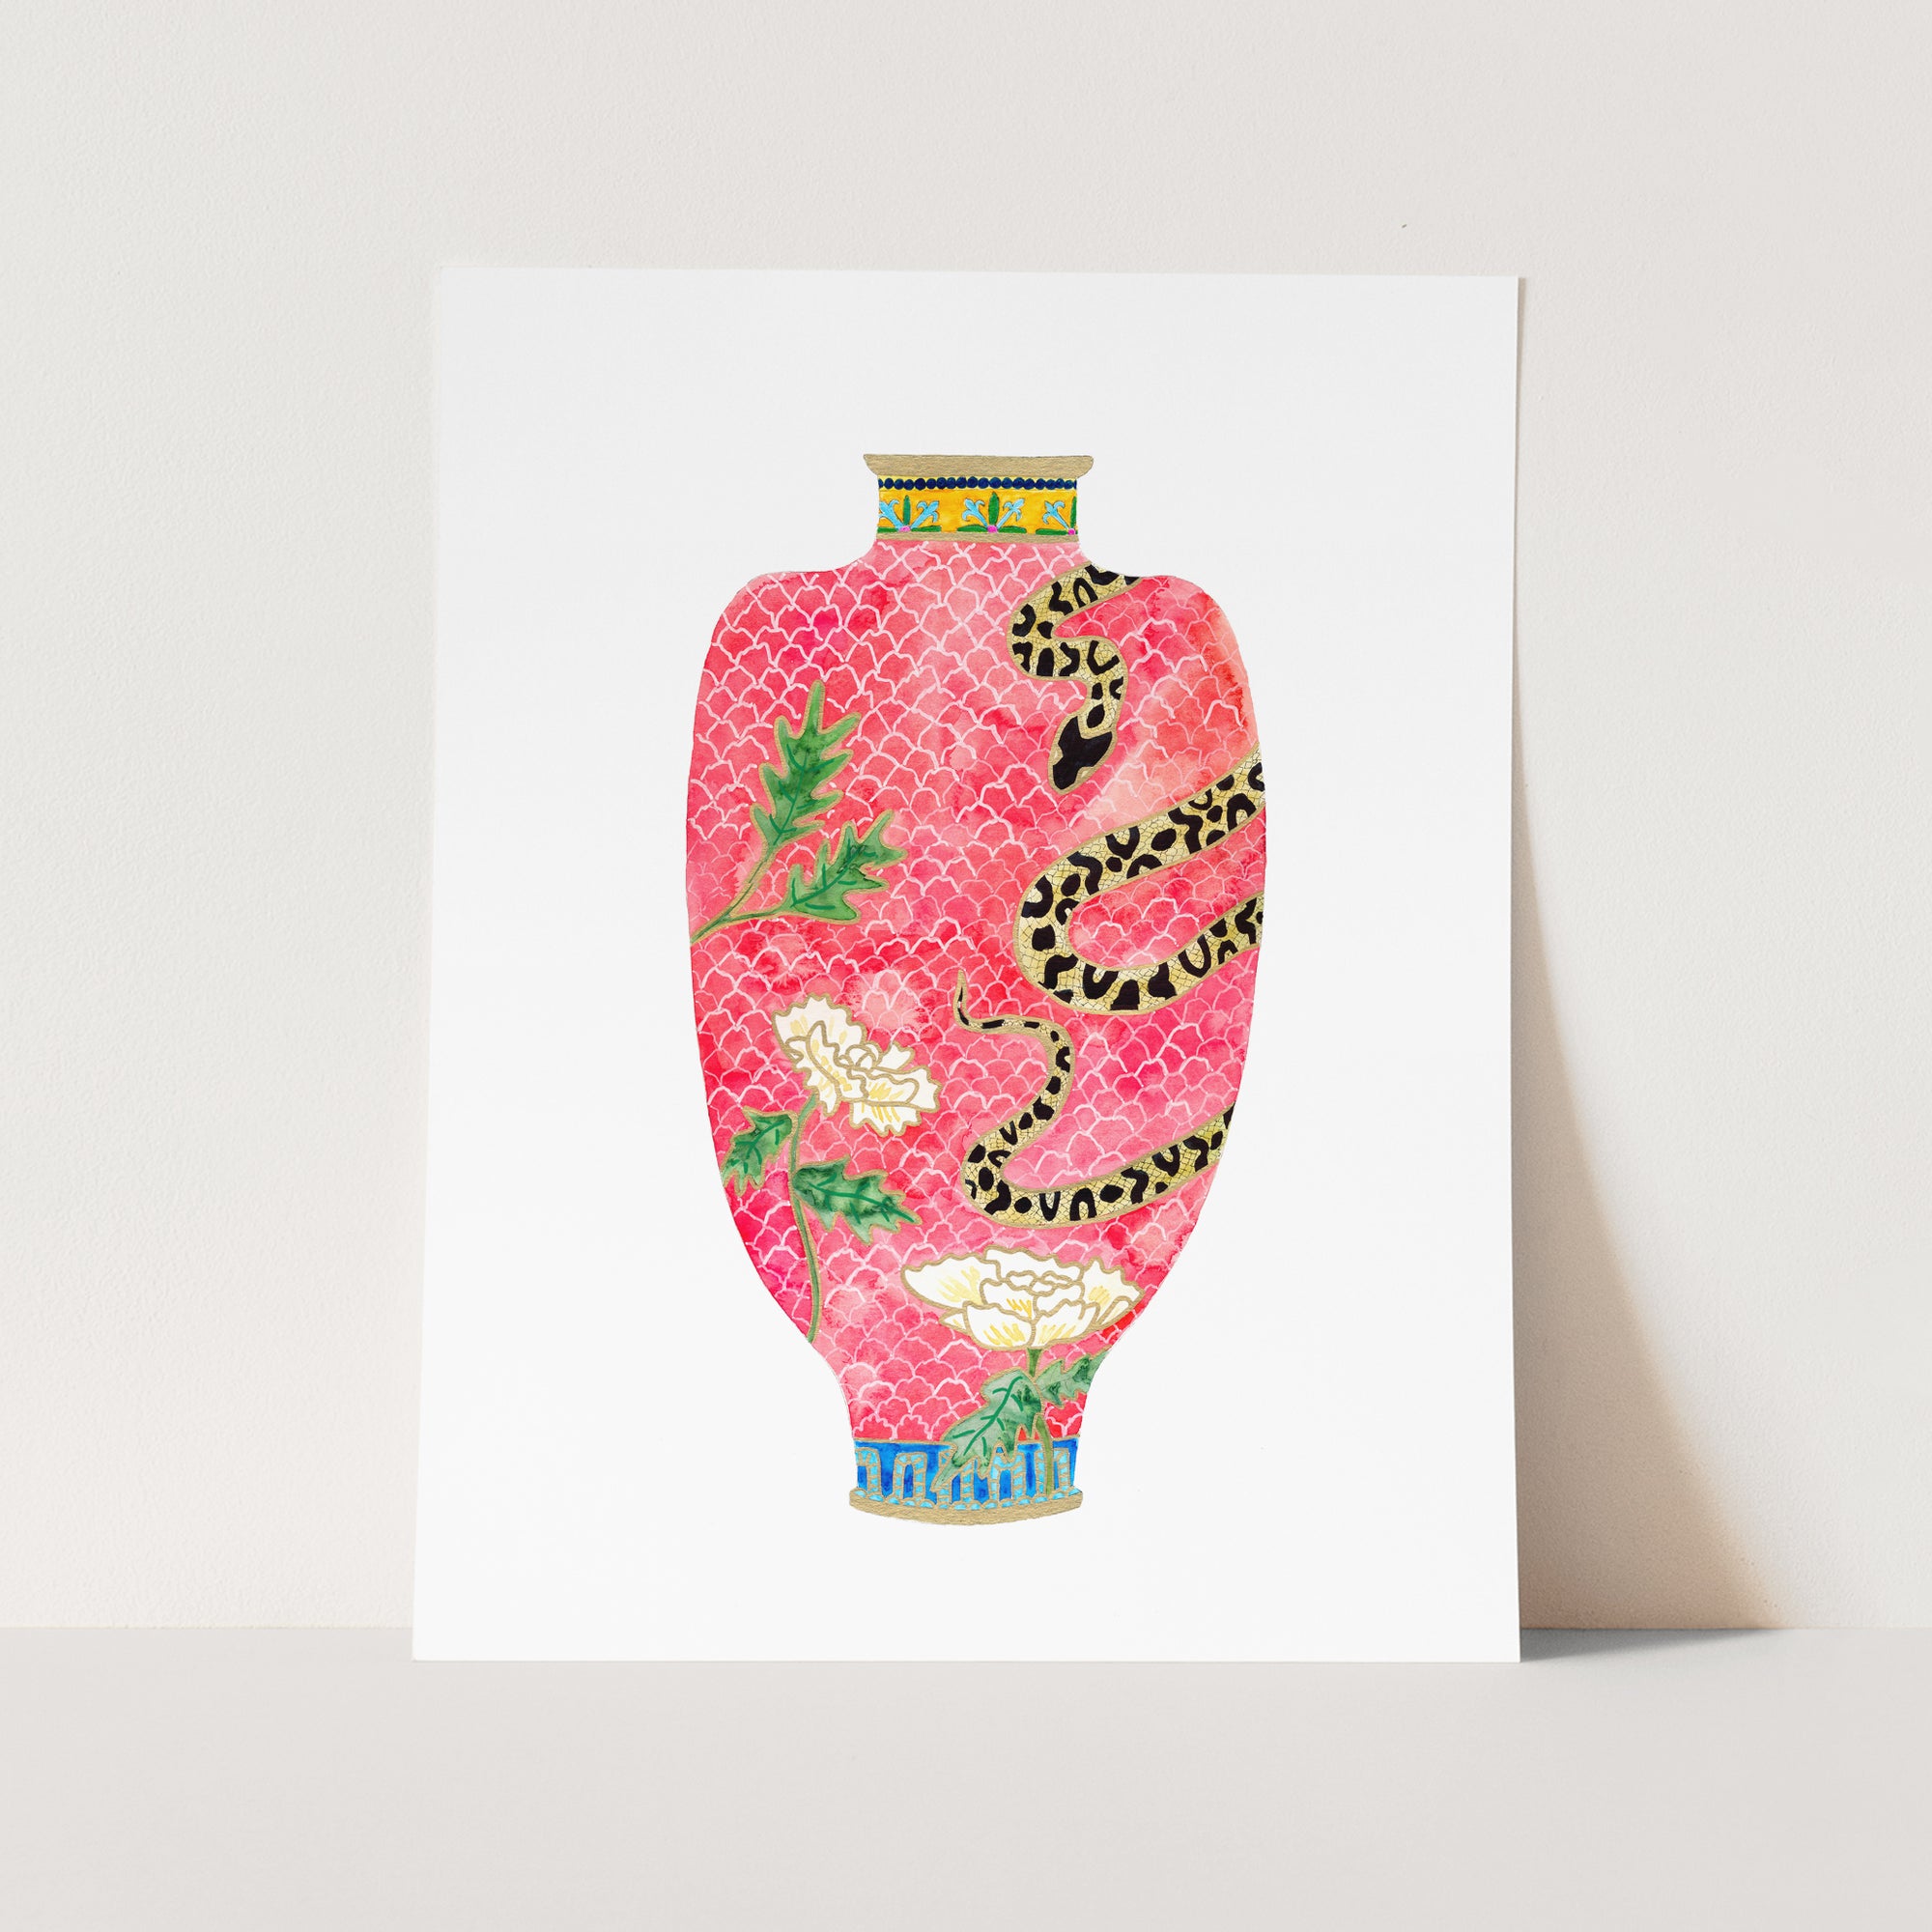 a picture of a pink vase on a white background